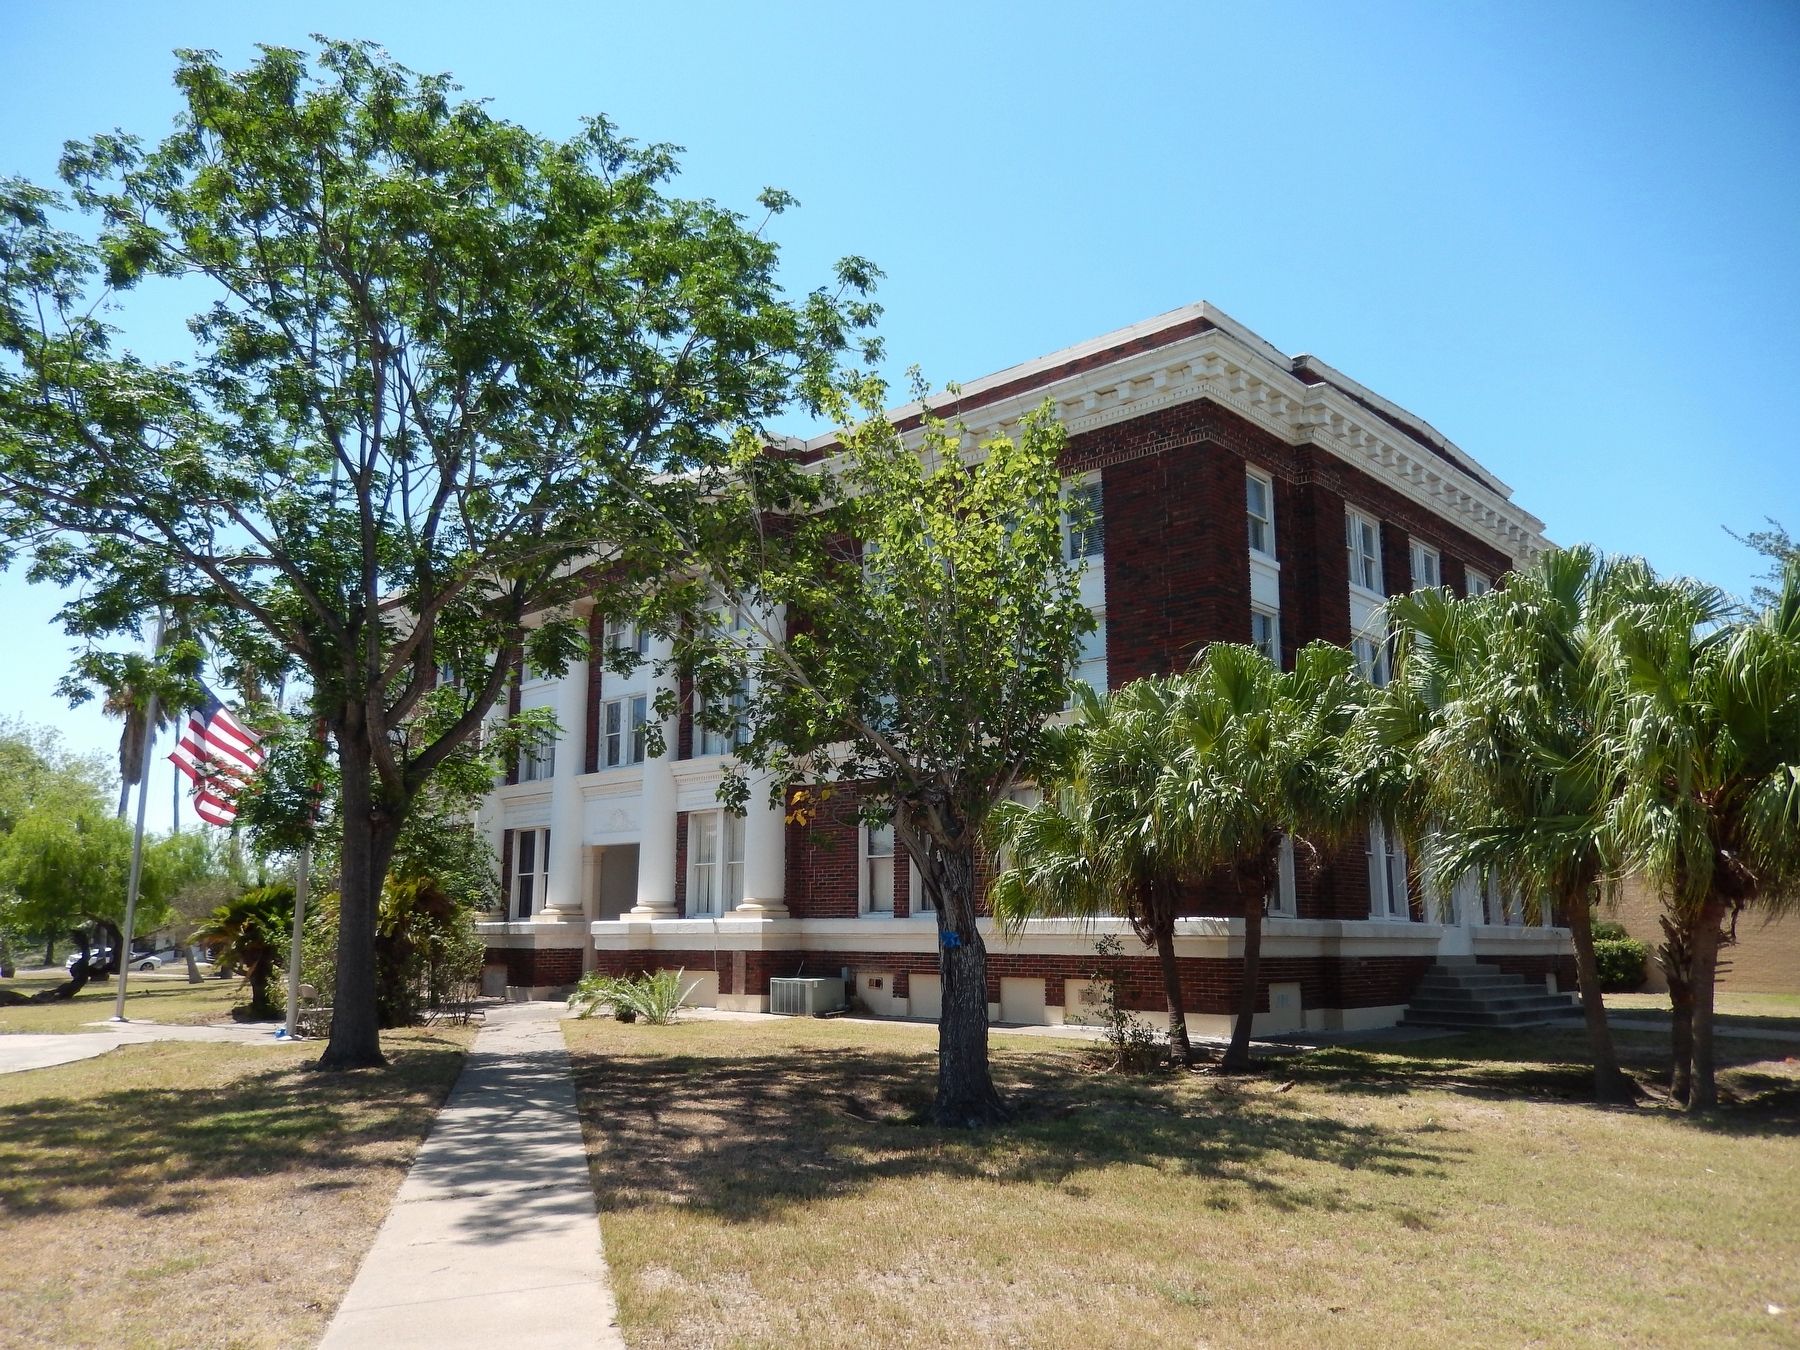 Willacy County Courthouse (<i>view from near marker</i>) image. Click for full size.